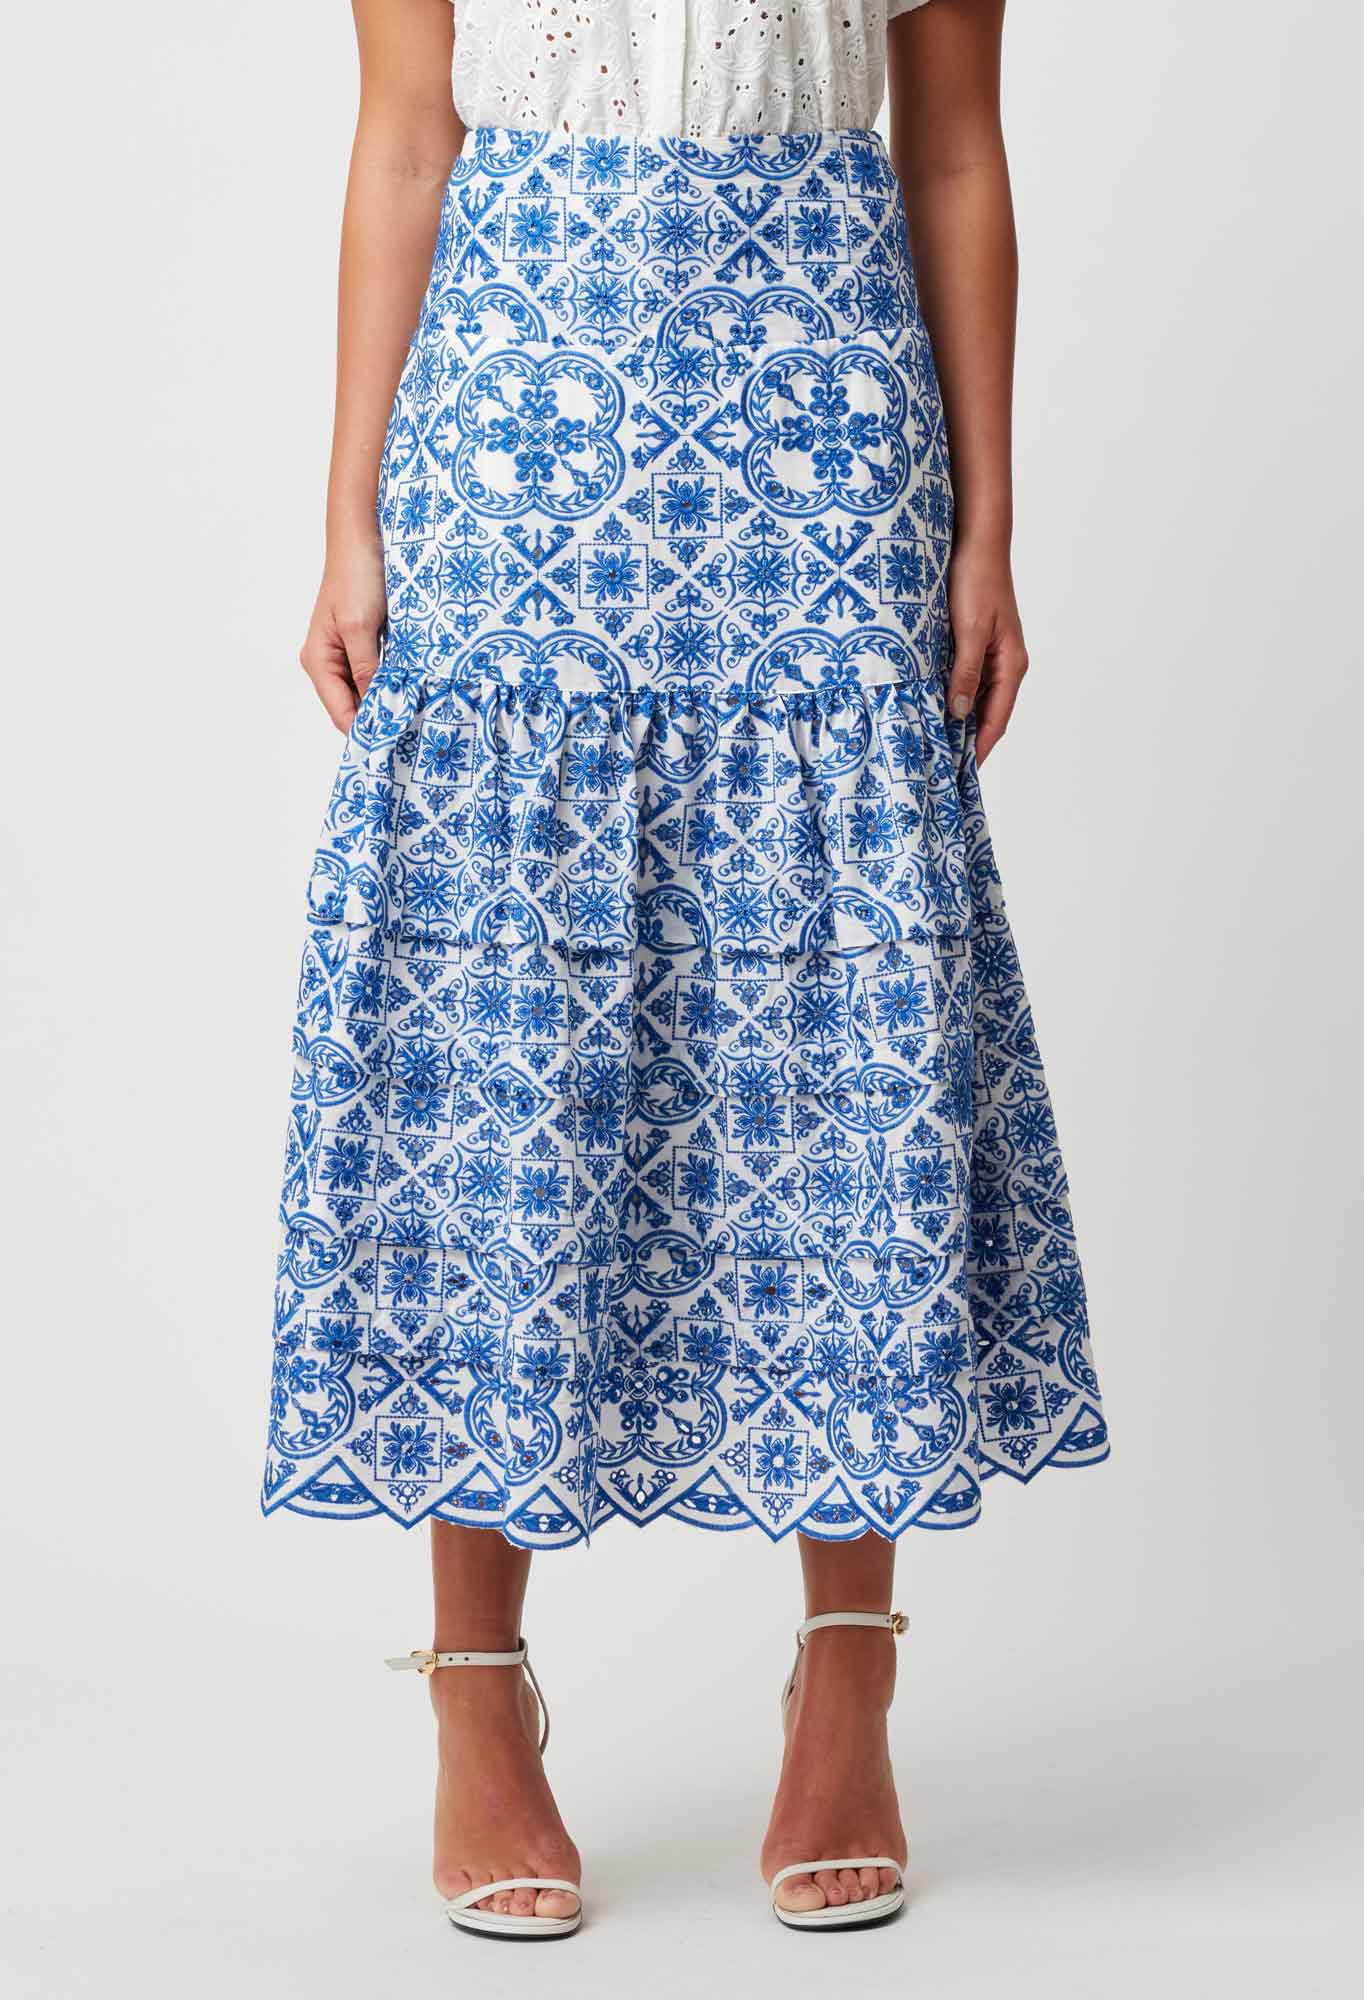 OnceWas Positano Embroidered Viscose Skirt in Azure Embroidery